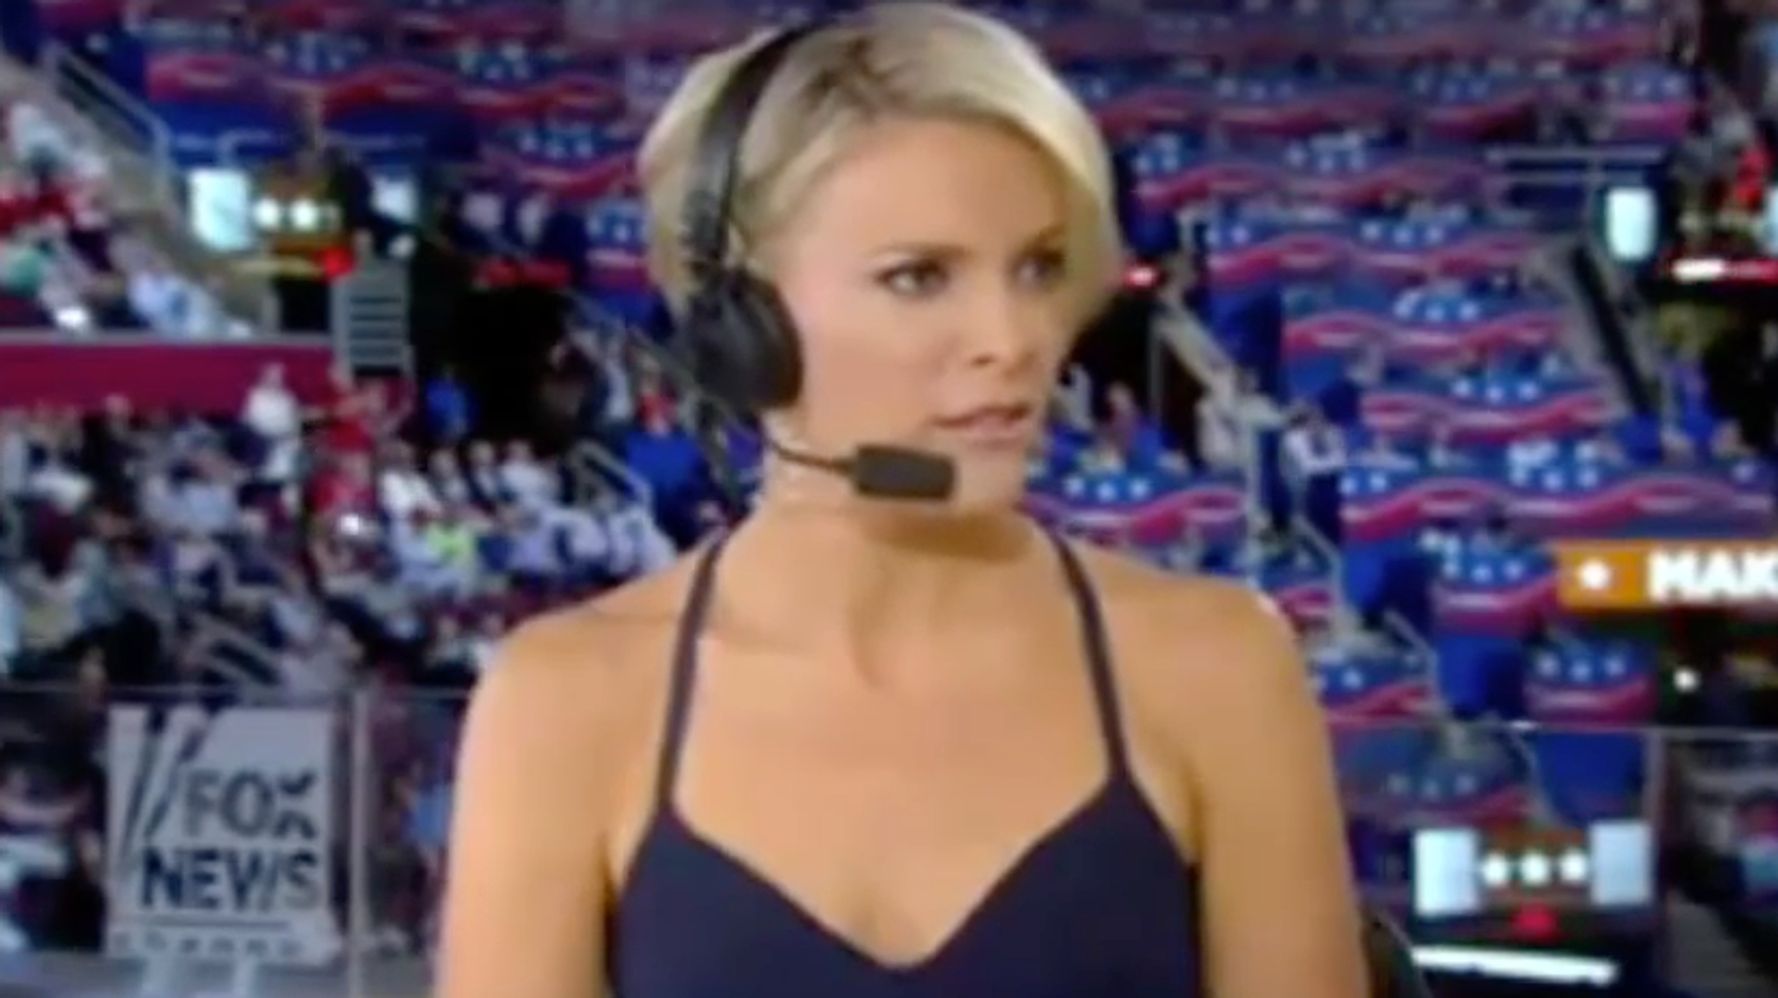 Megyn Kelly Wore Spaghetti Straps And People Lost It.